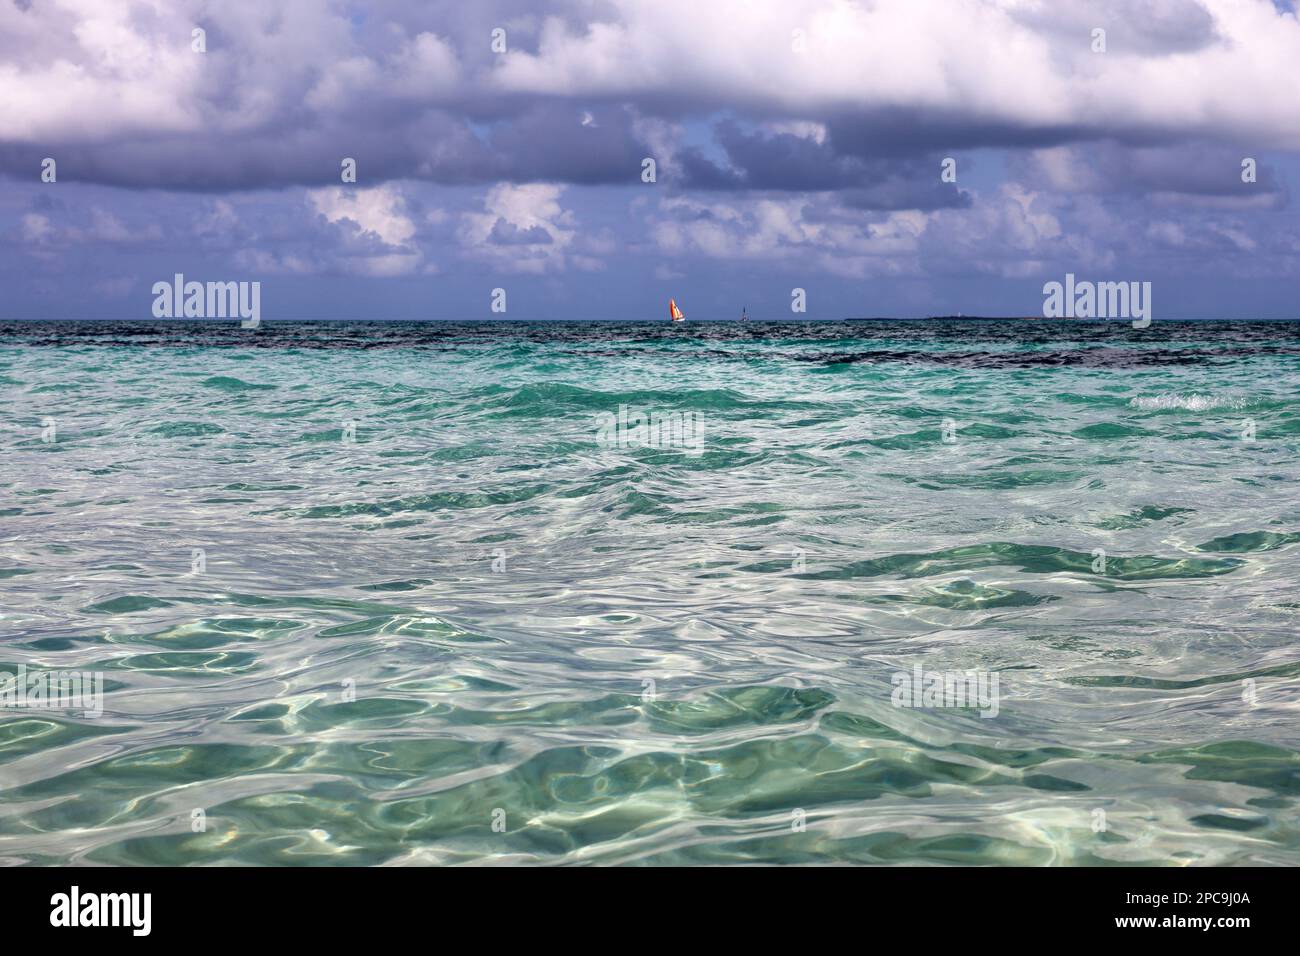 Sea water surface, sailboats on horizon, sky with storm clouds. Tropical beach, background for holidays and vacation Stock Photo